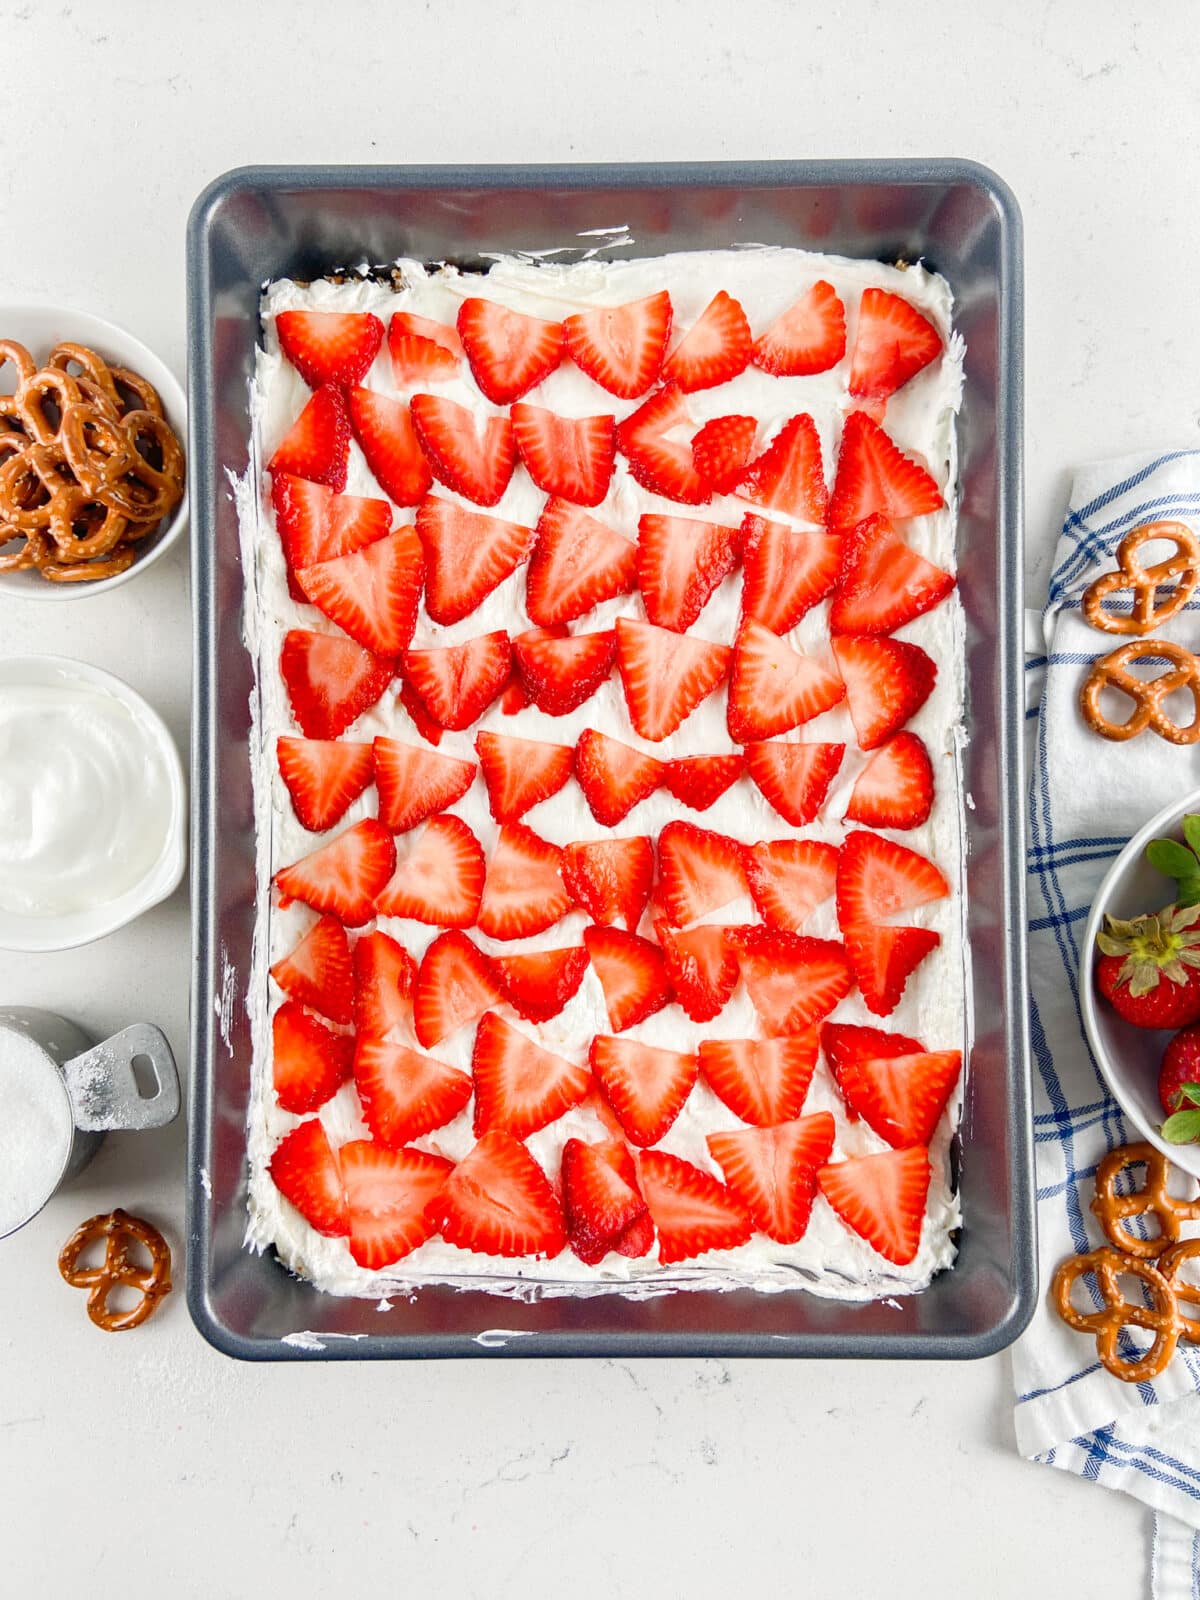 strawberries over cream cheese layer in pan.